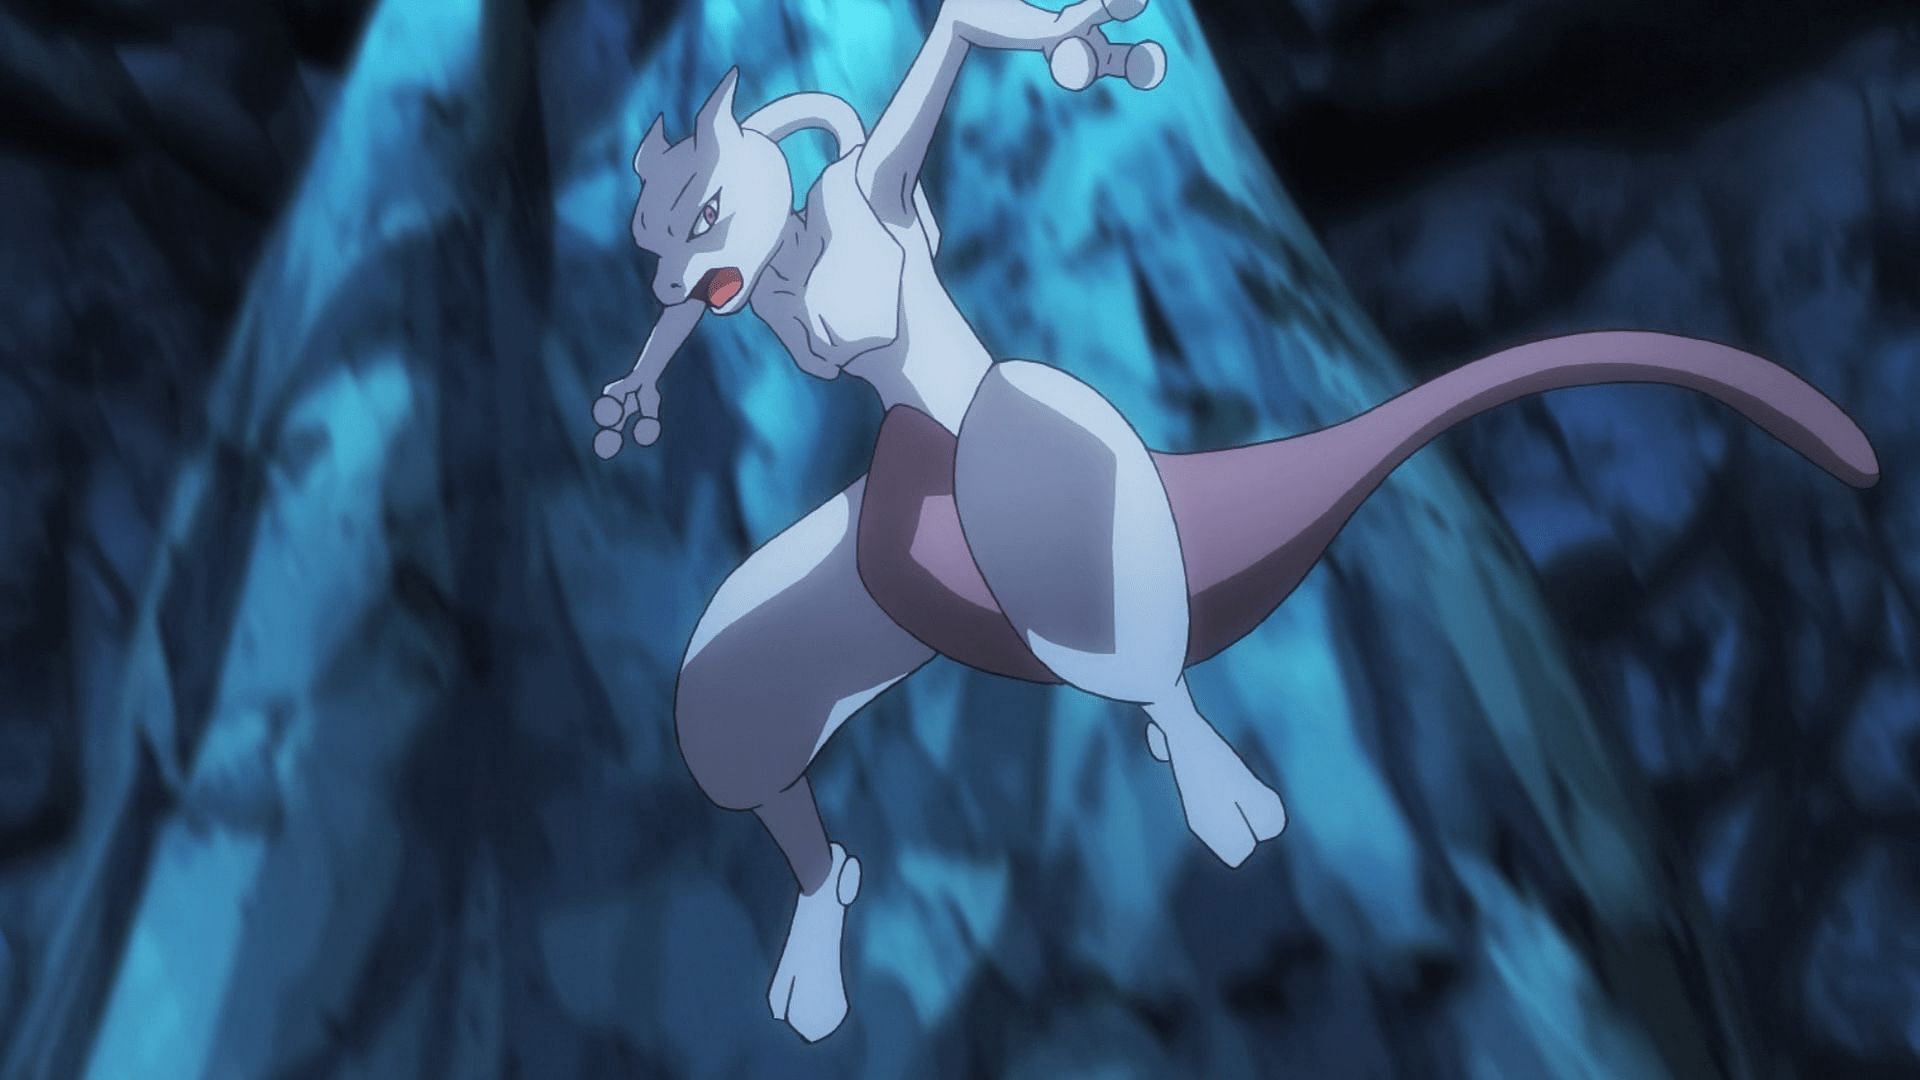 Mewtwo as seen in the anime